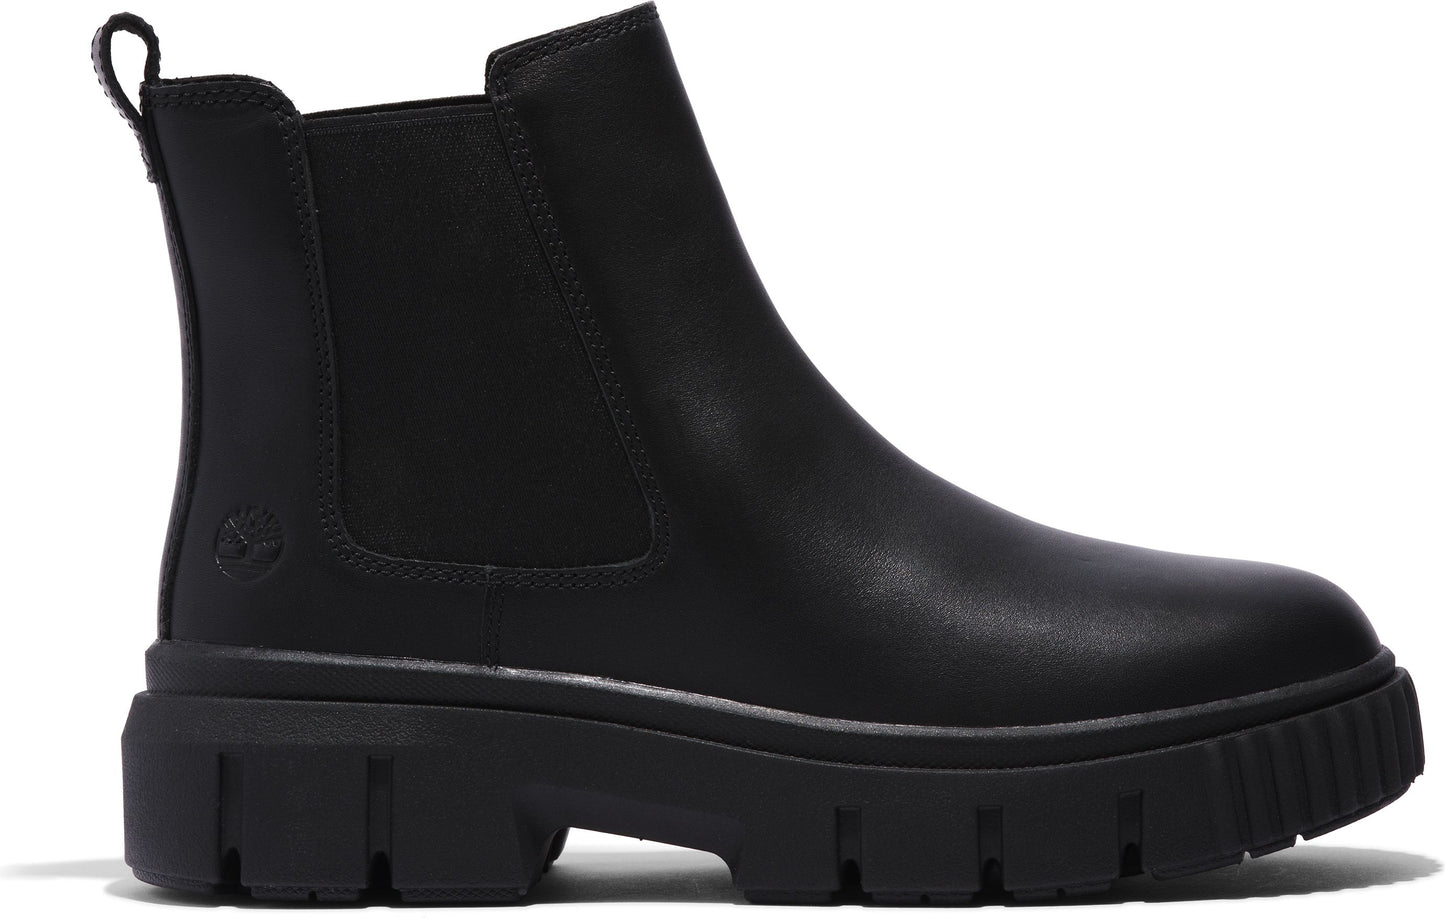 Timberland Boots Greyfield Chelsea Black Fg